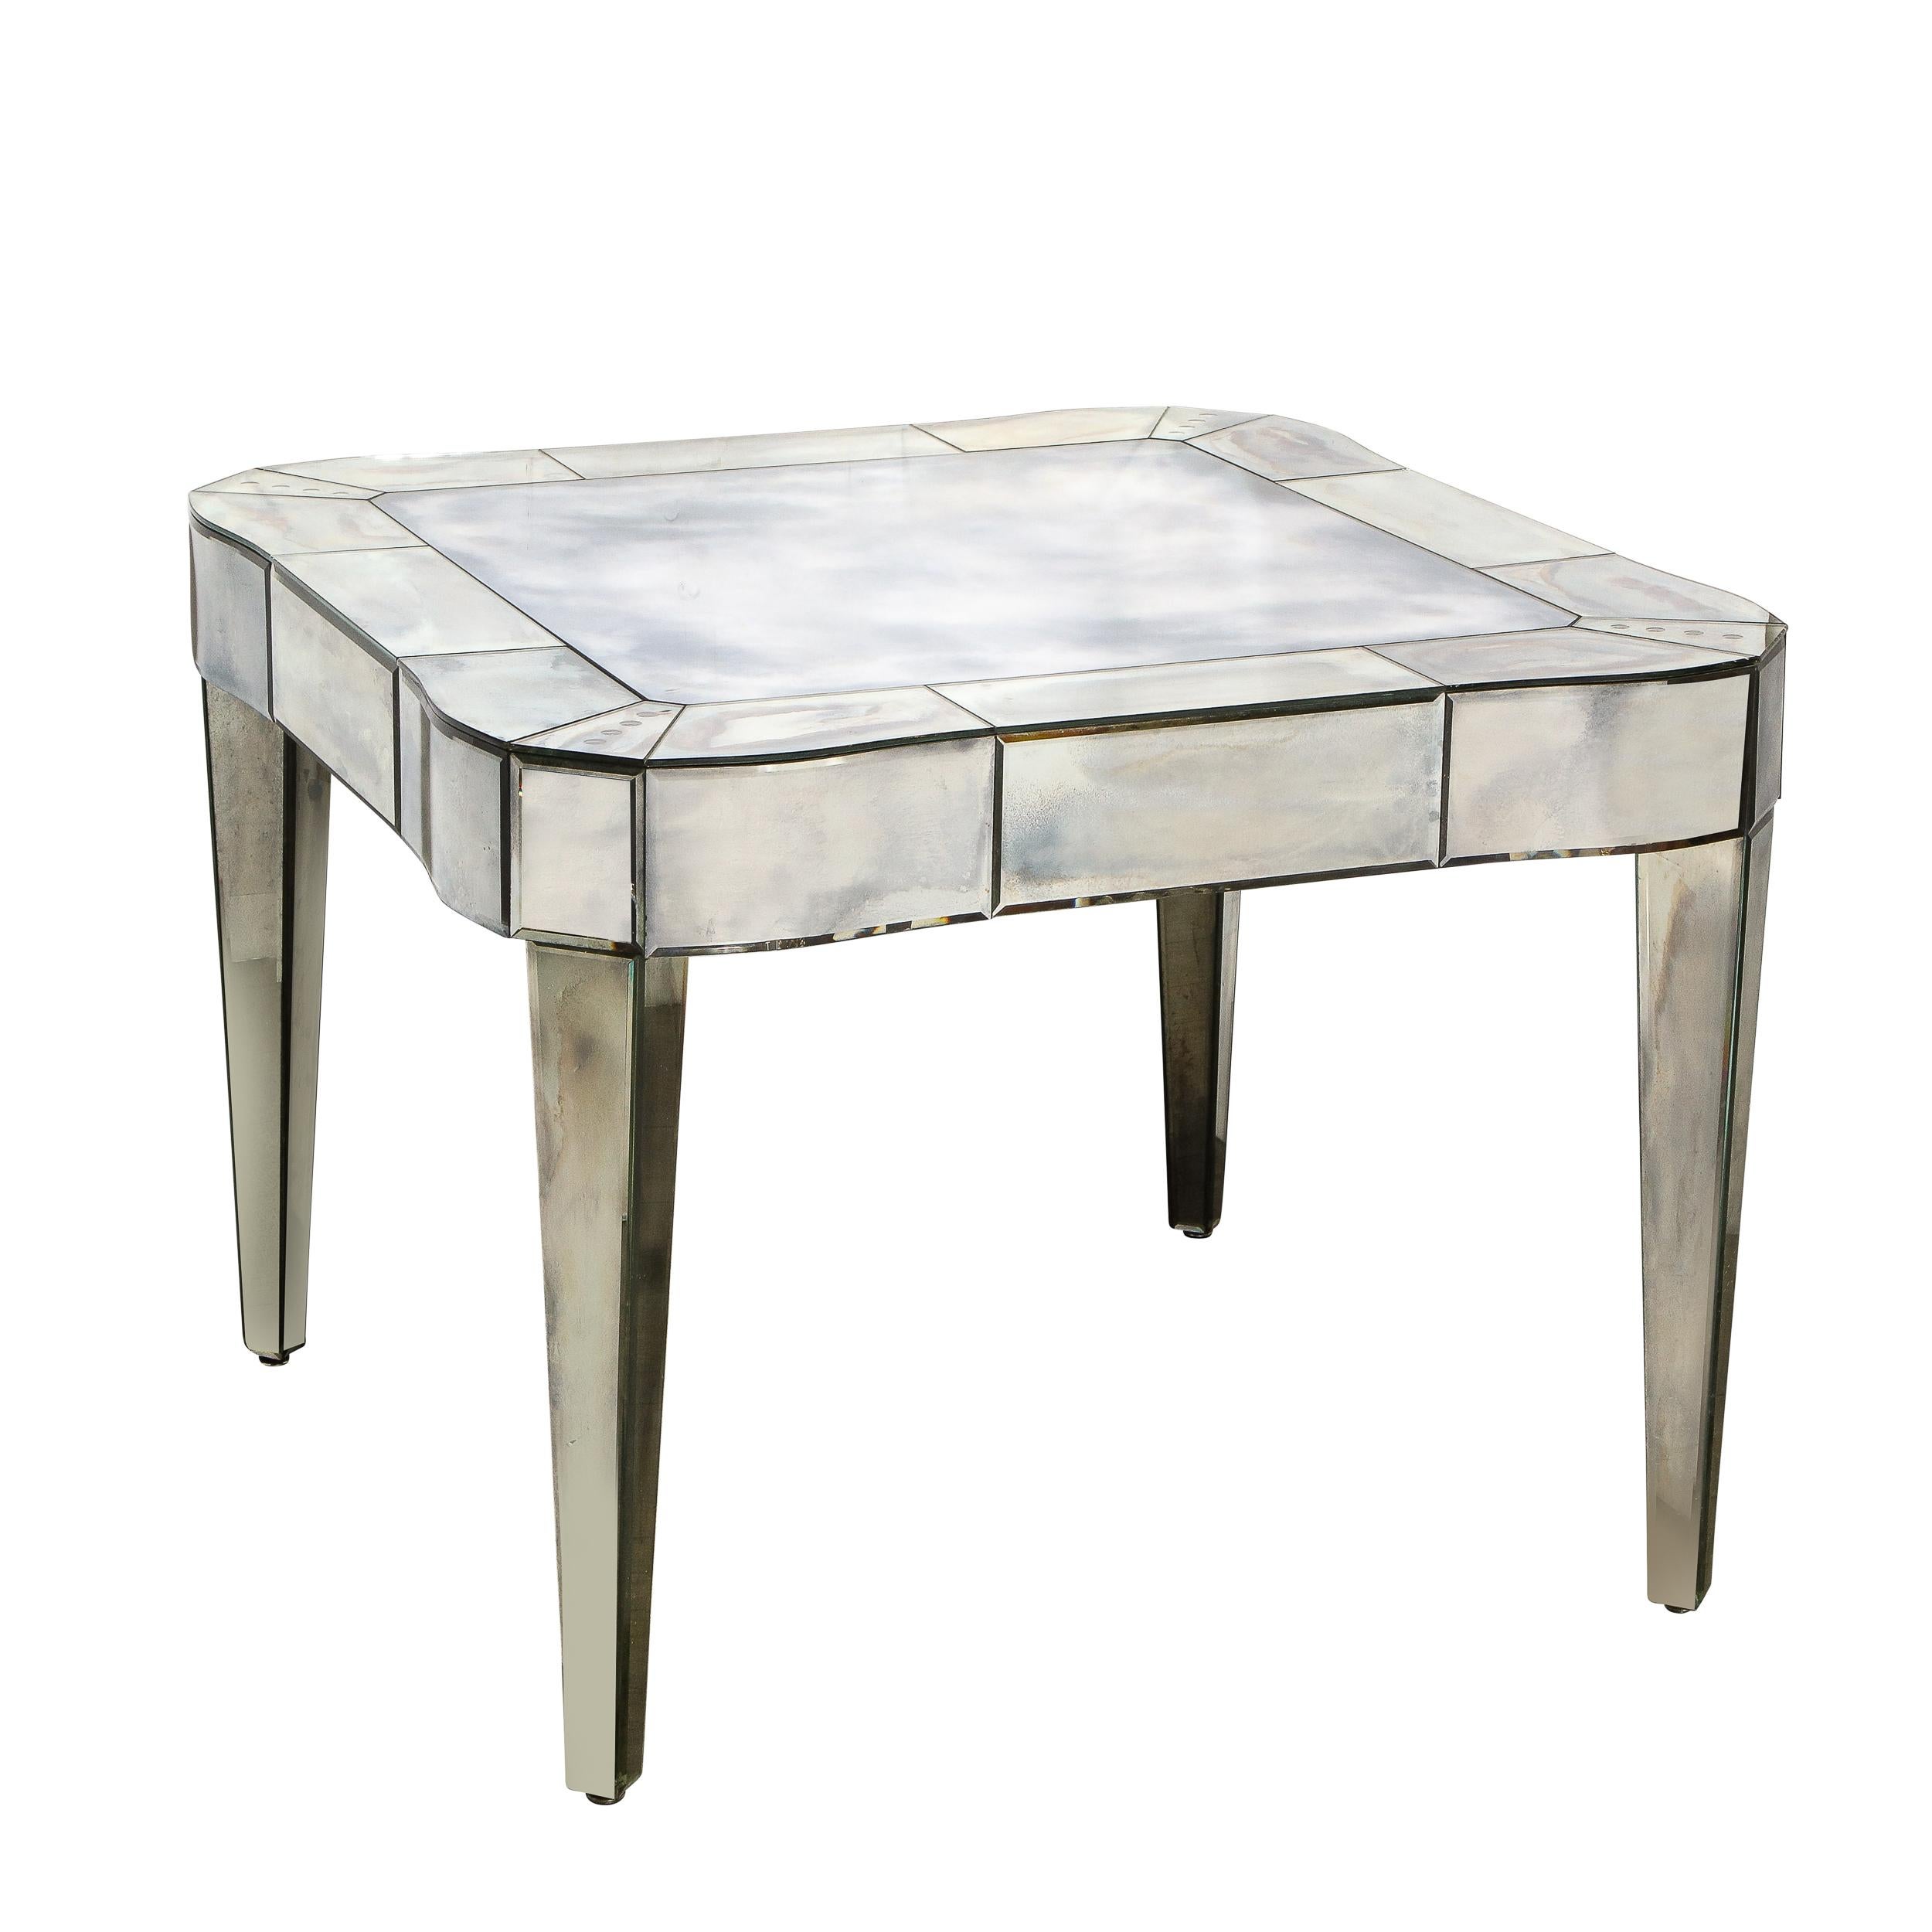 This stunningly beautiful mid-century smoked mirrored table with slightly bowed and curved corners was realized in America. This timeless piece features a beveled, tessellated top with a undulating mirrored apron that connects to tapered elegant